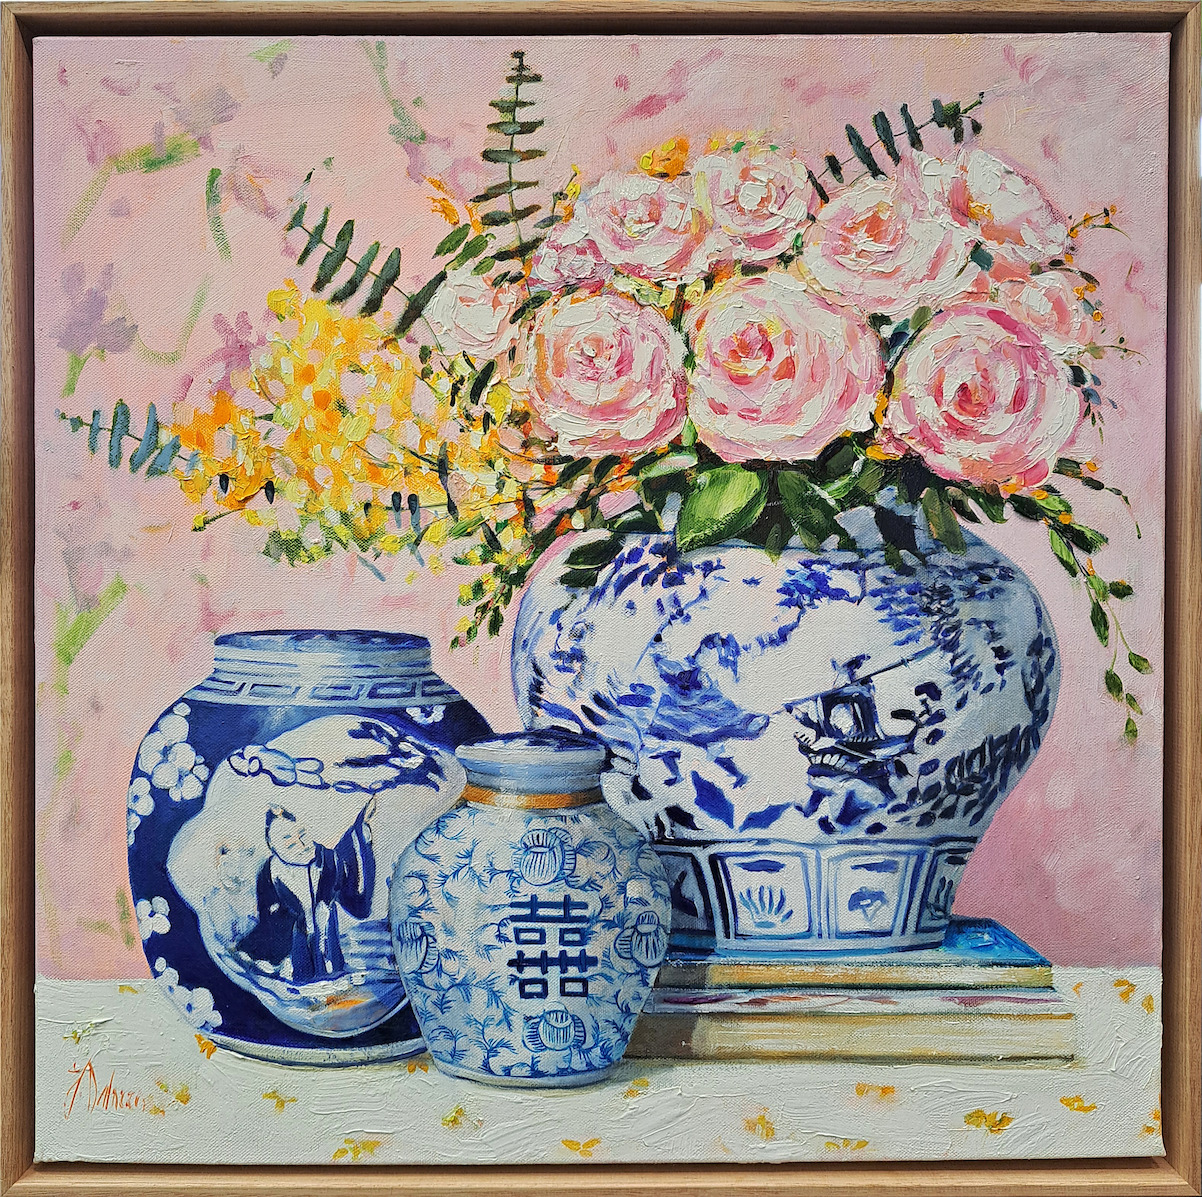 Framed Front View Of Still Life Painting "Pure Joy" By Judith Dalozzo